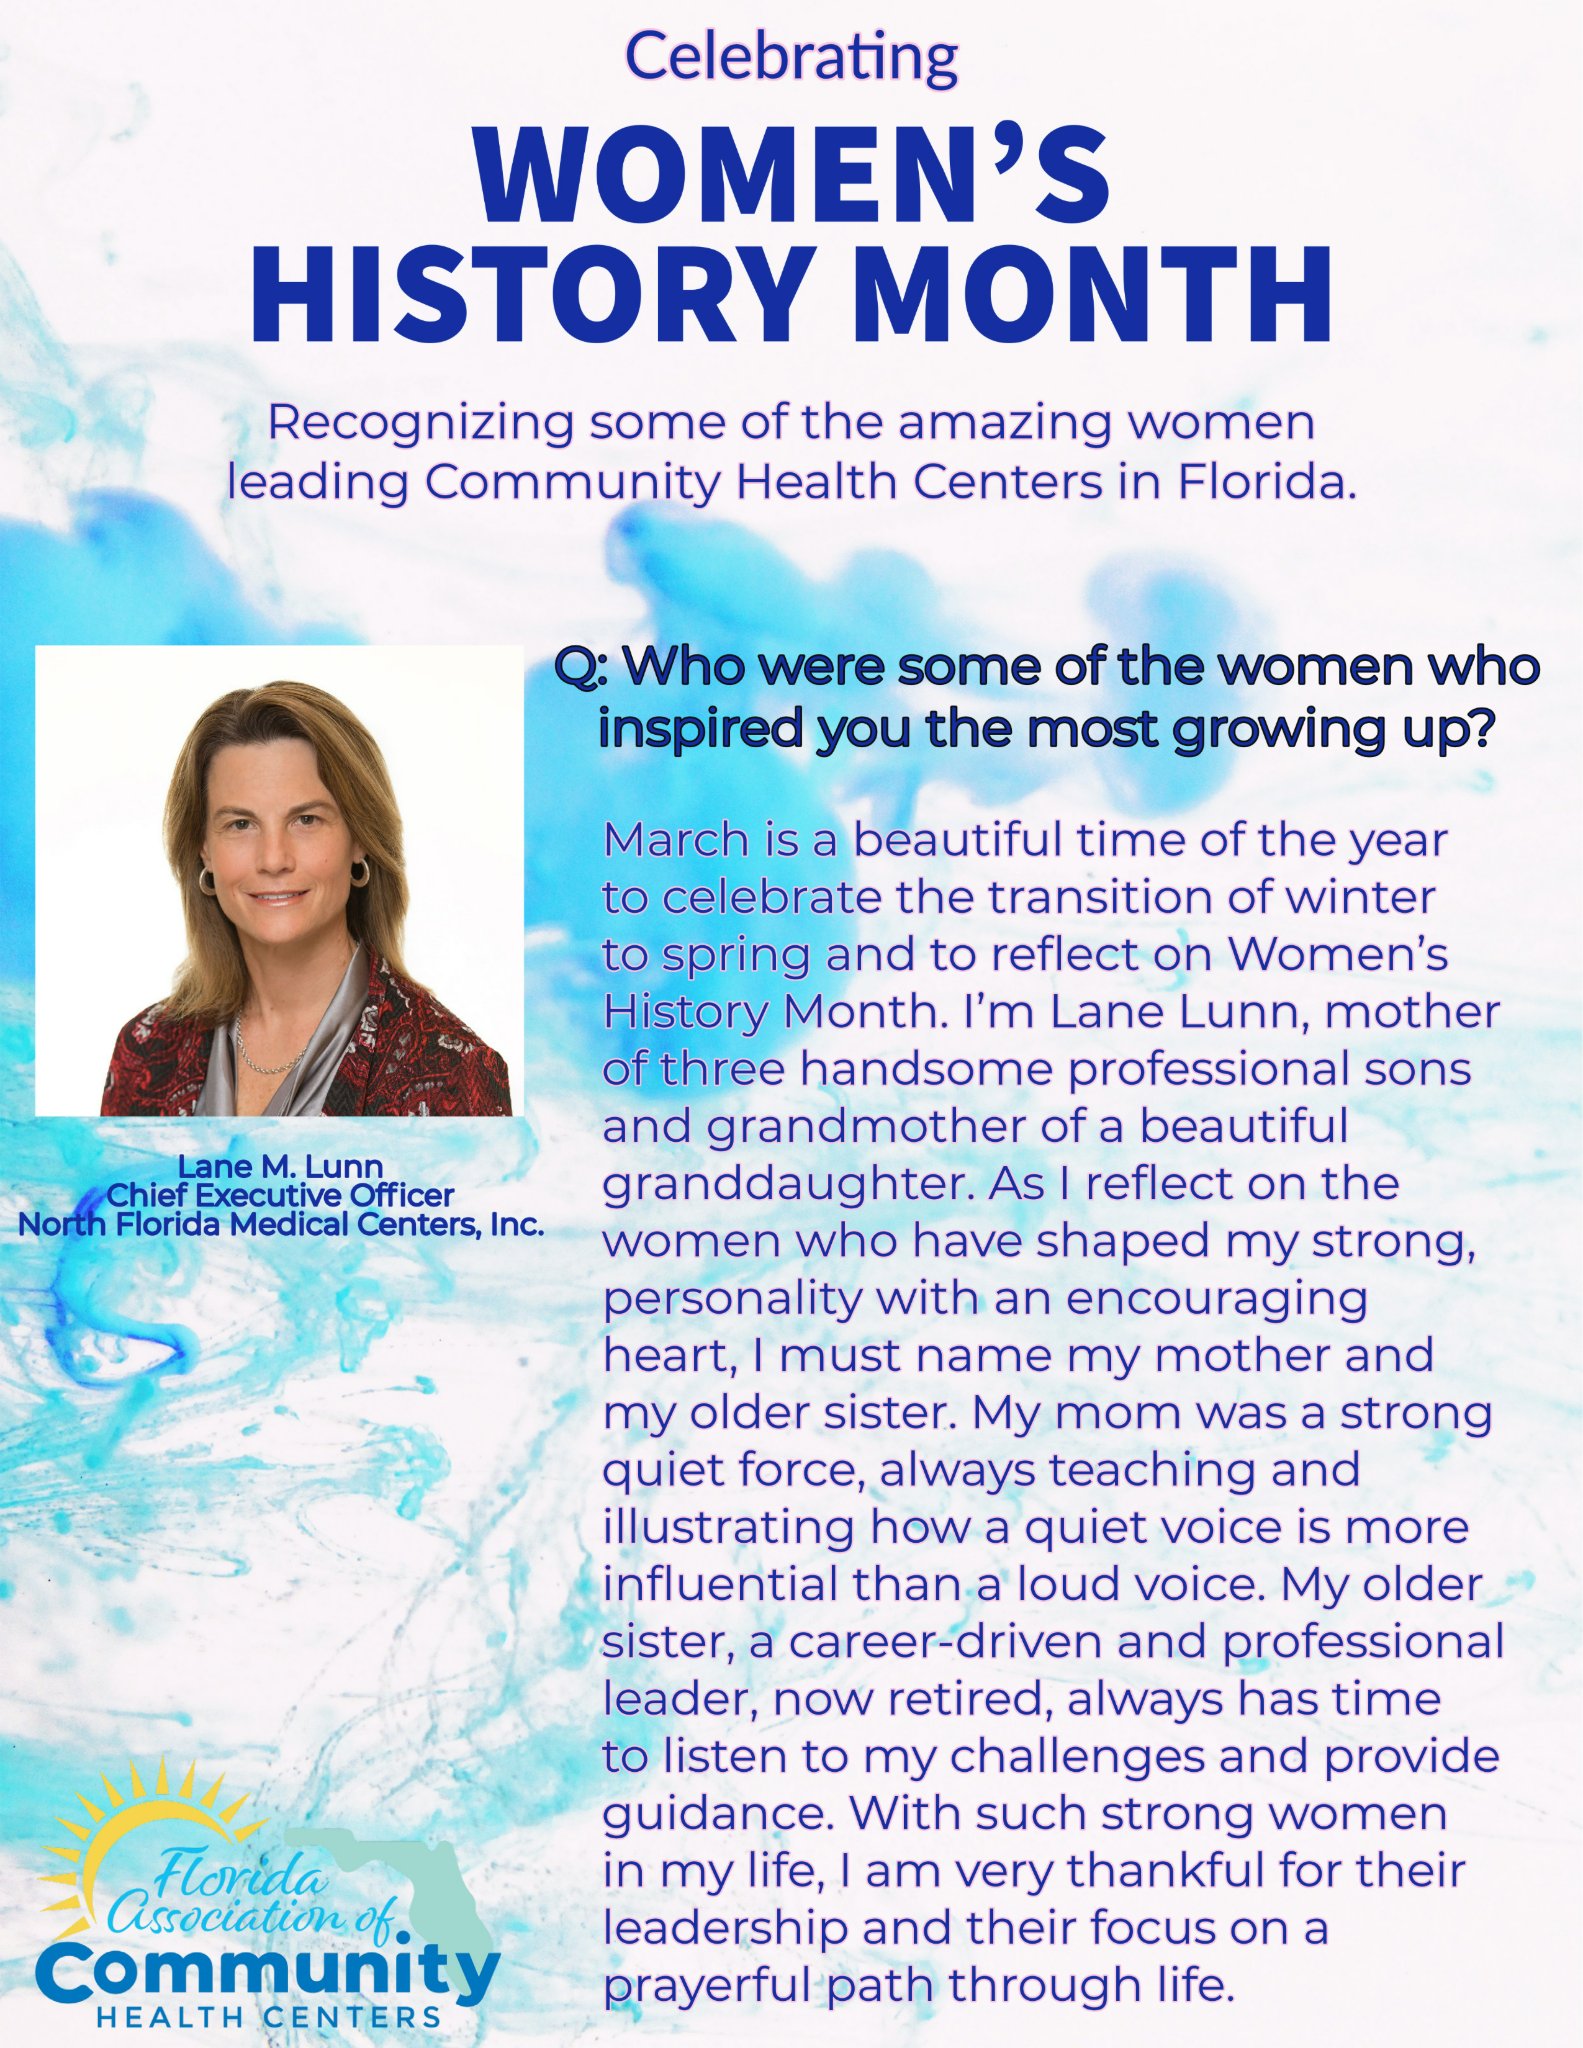 Lane Lunn, CEO featured for Womens History Month